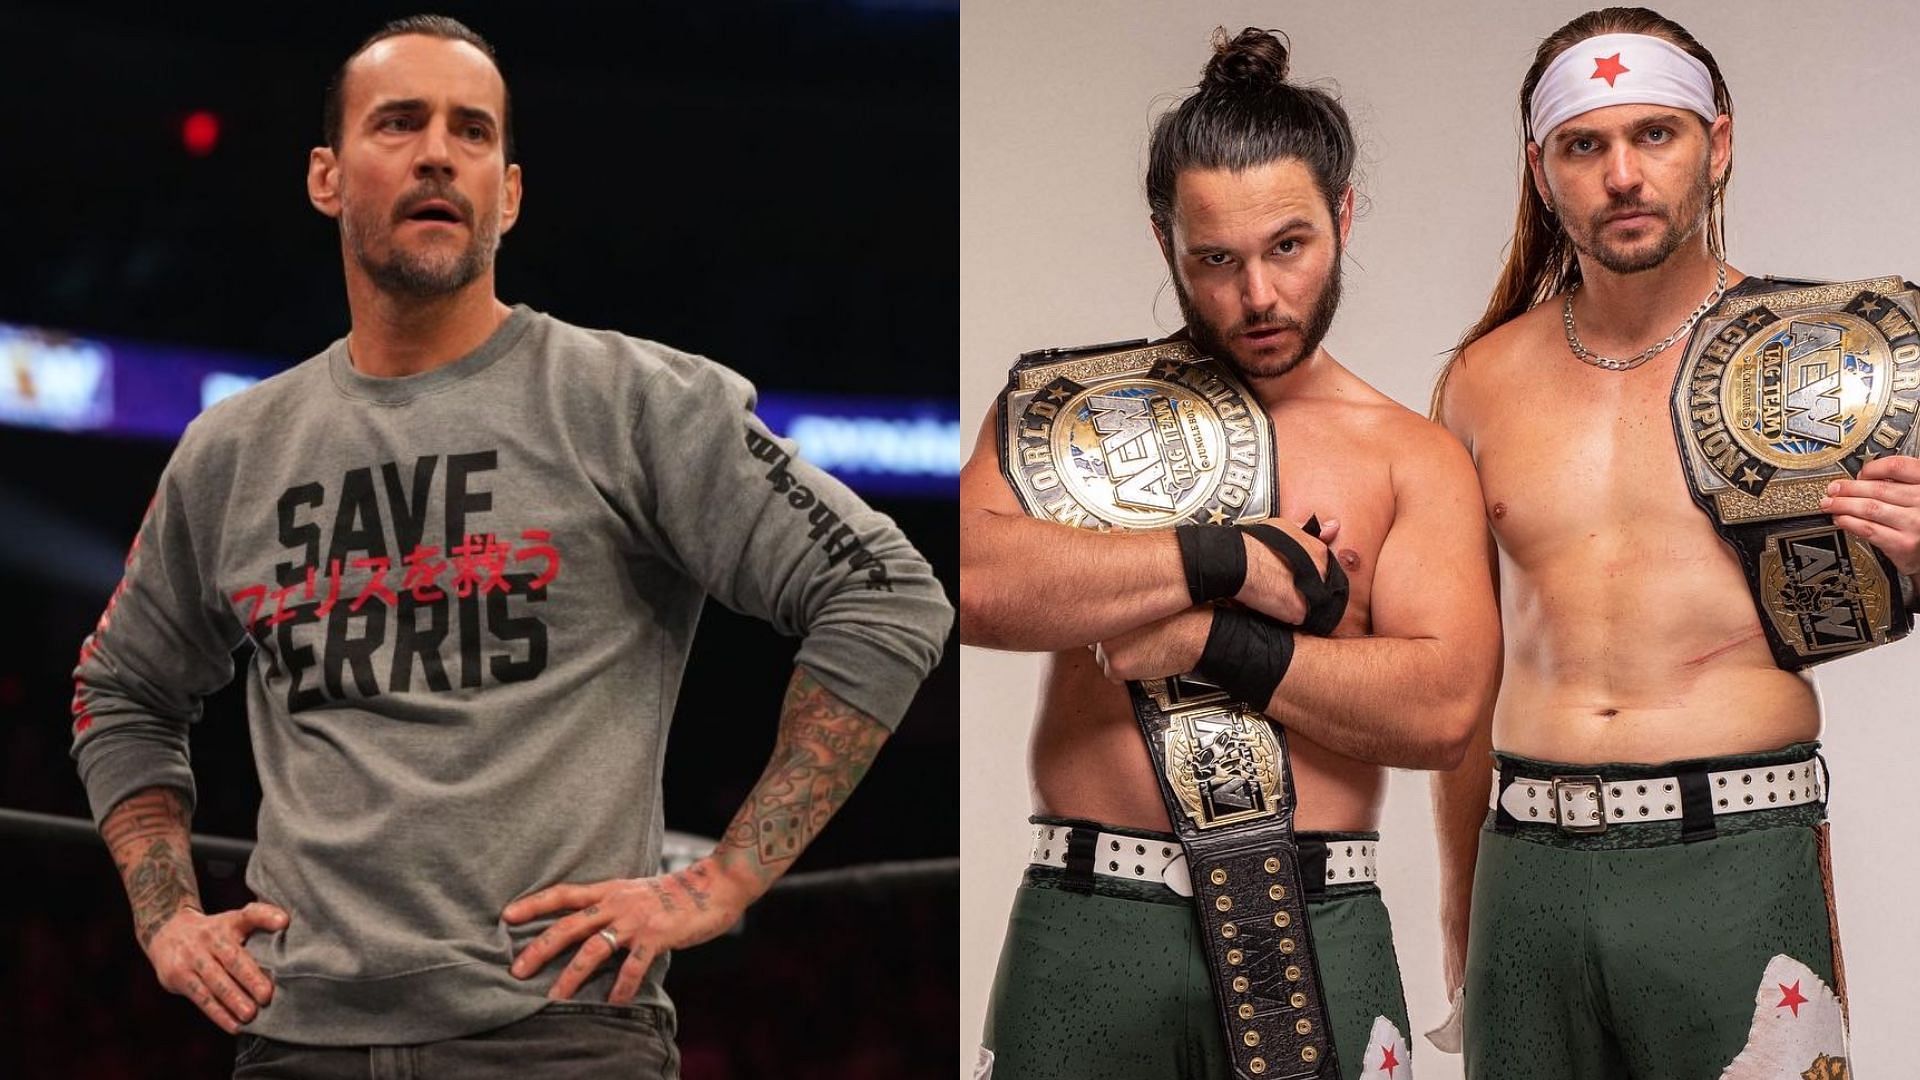 Were The Young Bucks reasonable in declining to meet with CM Punk?